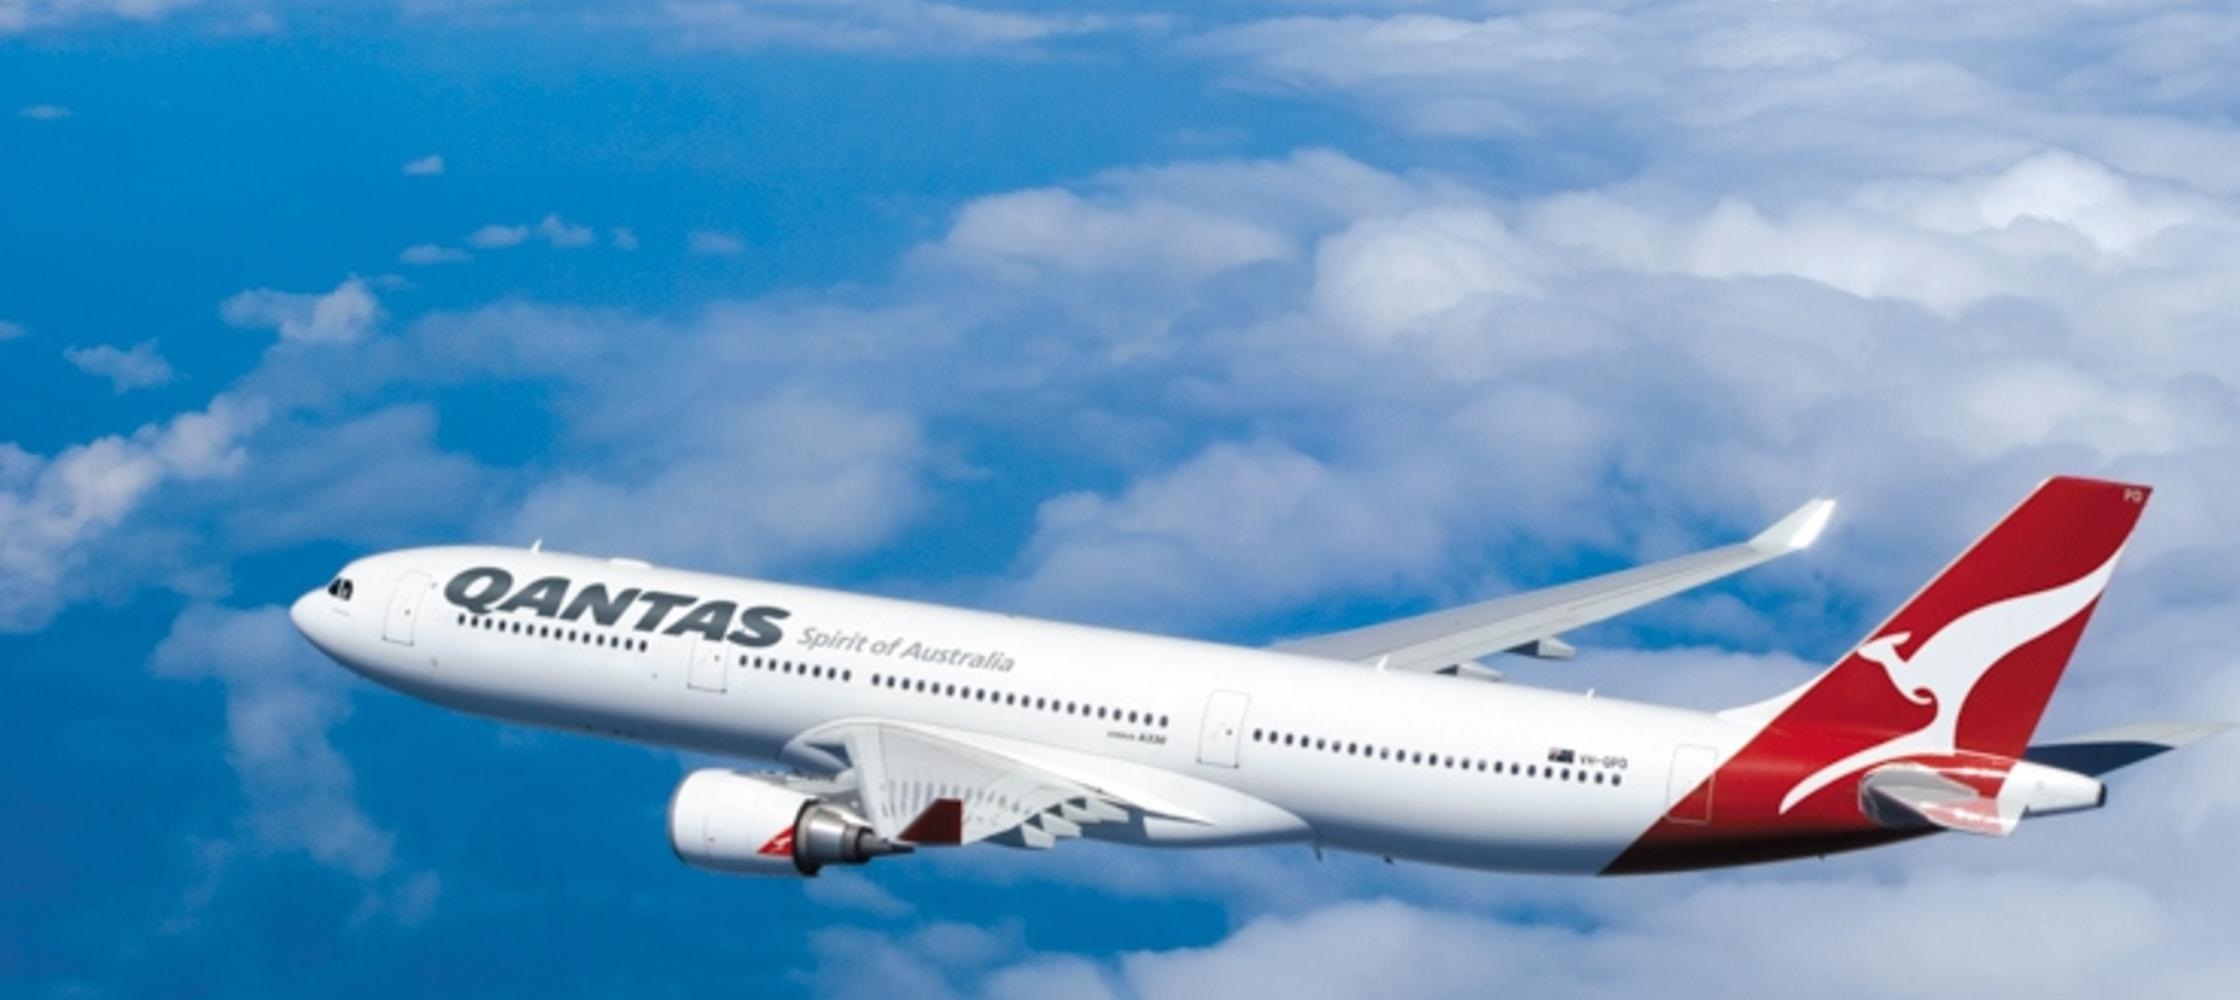 Qantas Airline Australia International Markets Entry Research Project